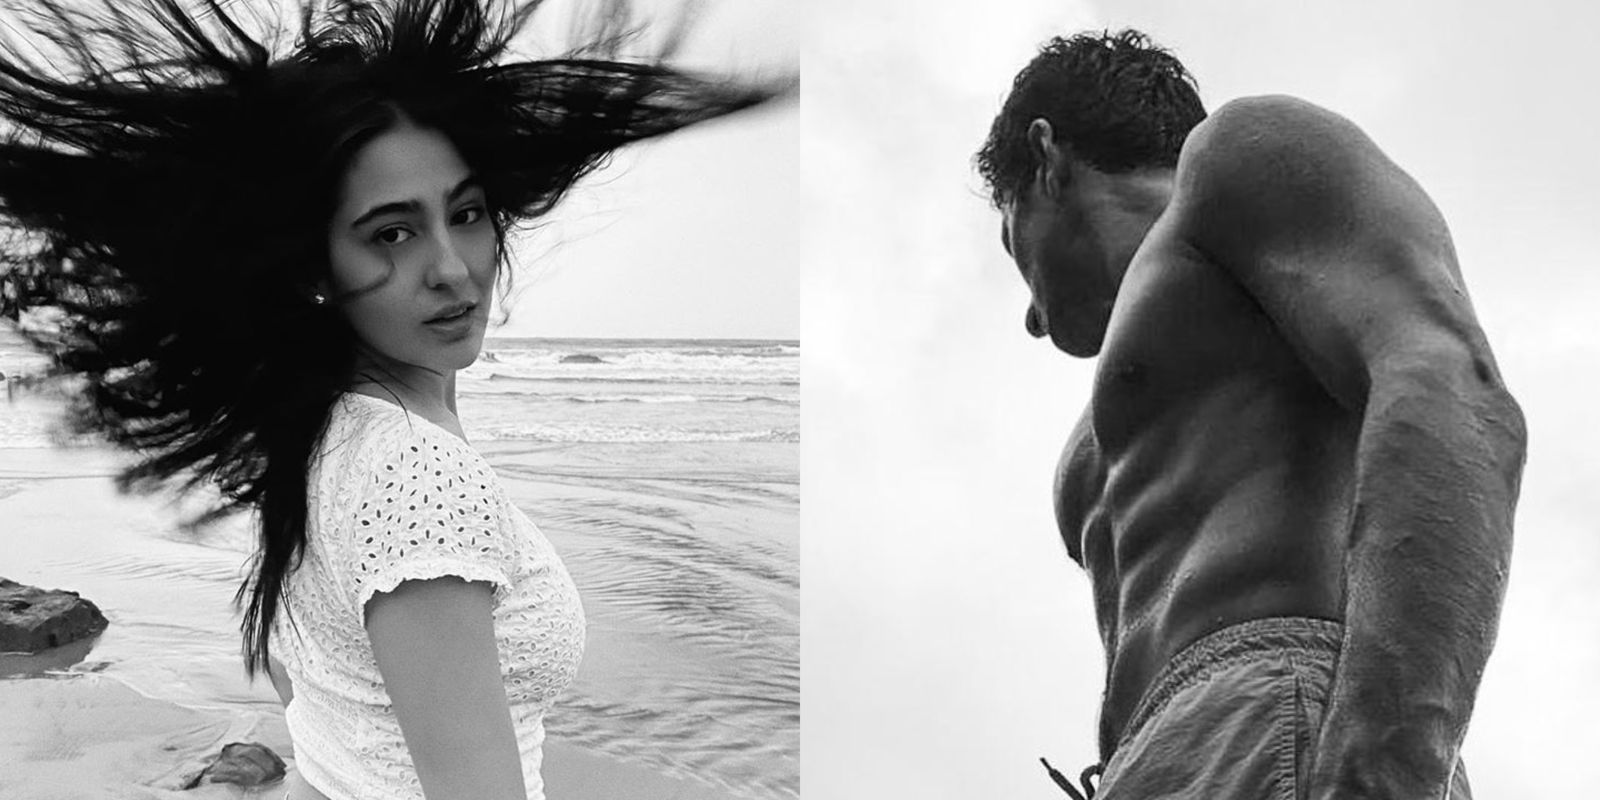 Sara Ali Khan And Brother Ibrahim Ali Khan’s Mesmerizing Monochrome Pictures Set The Internet On Fire